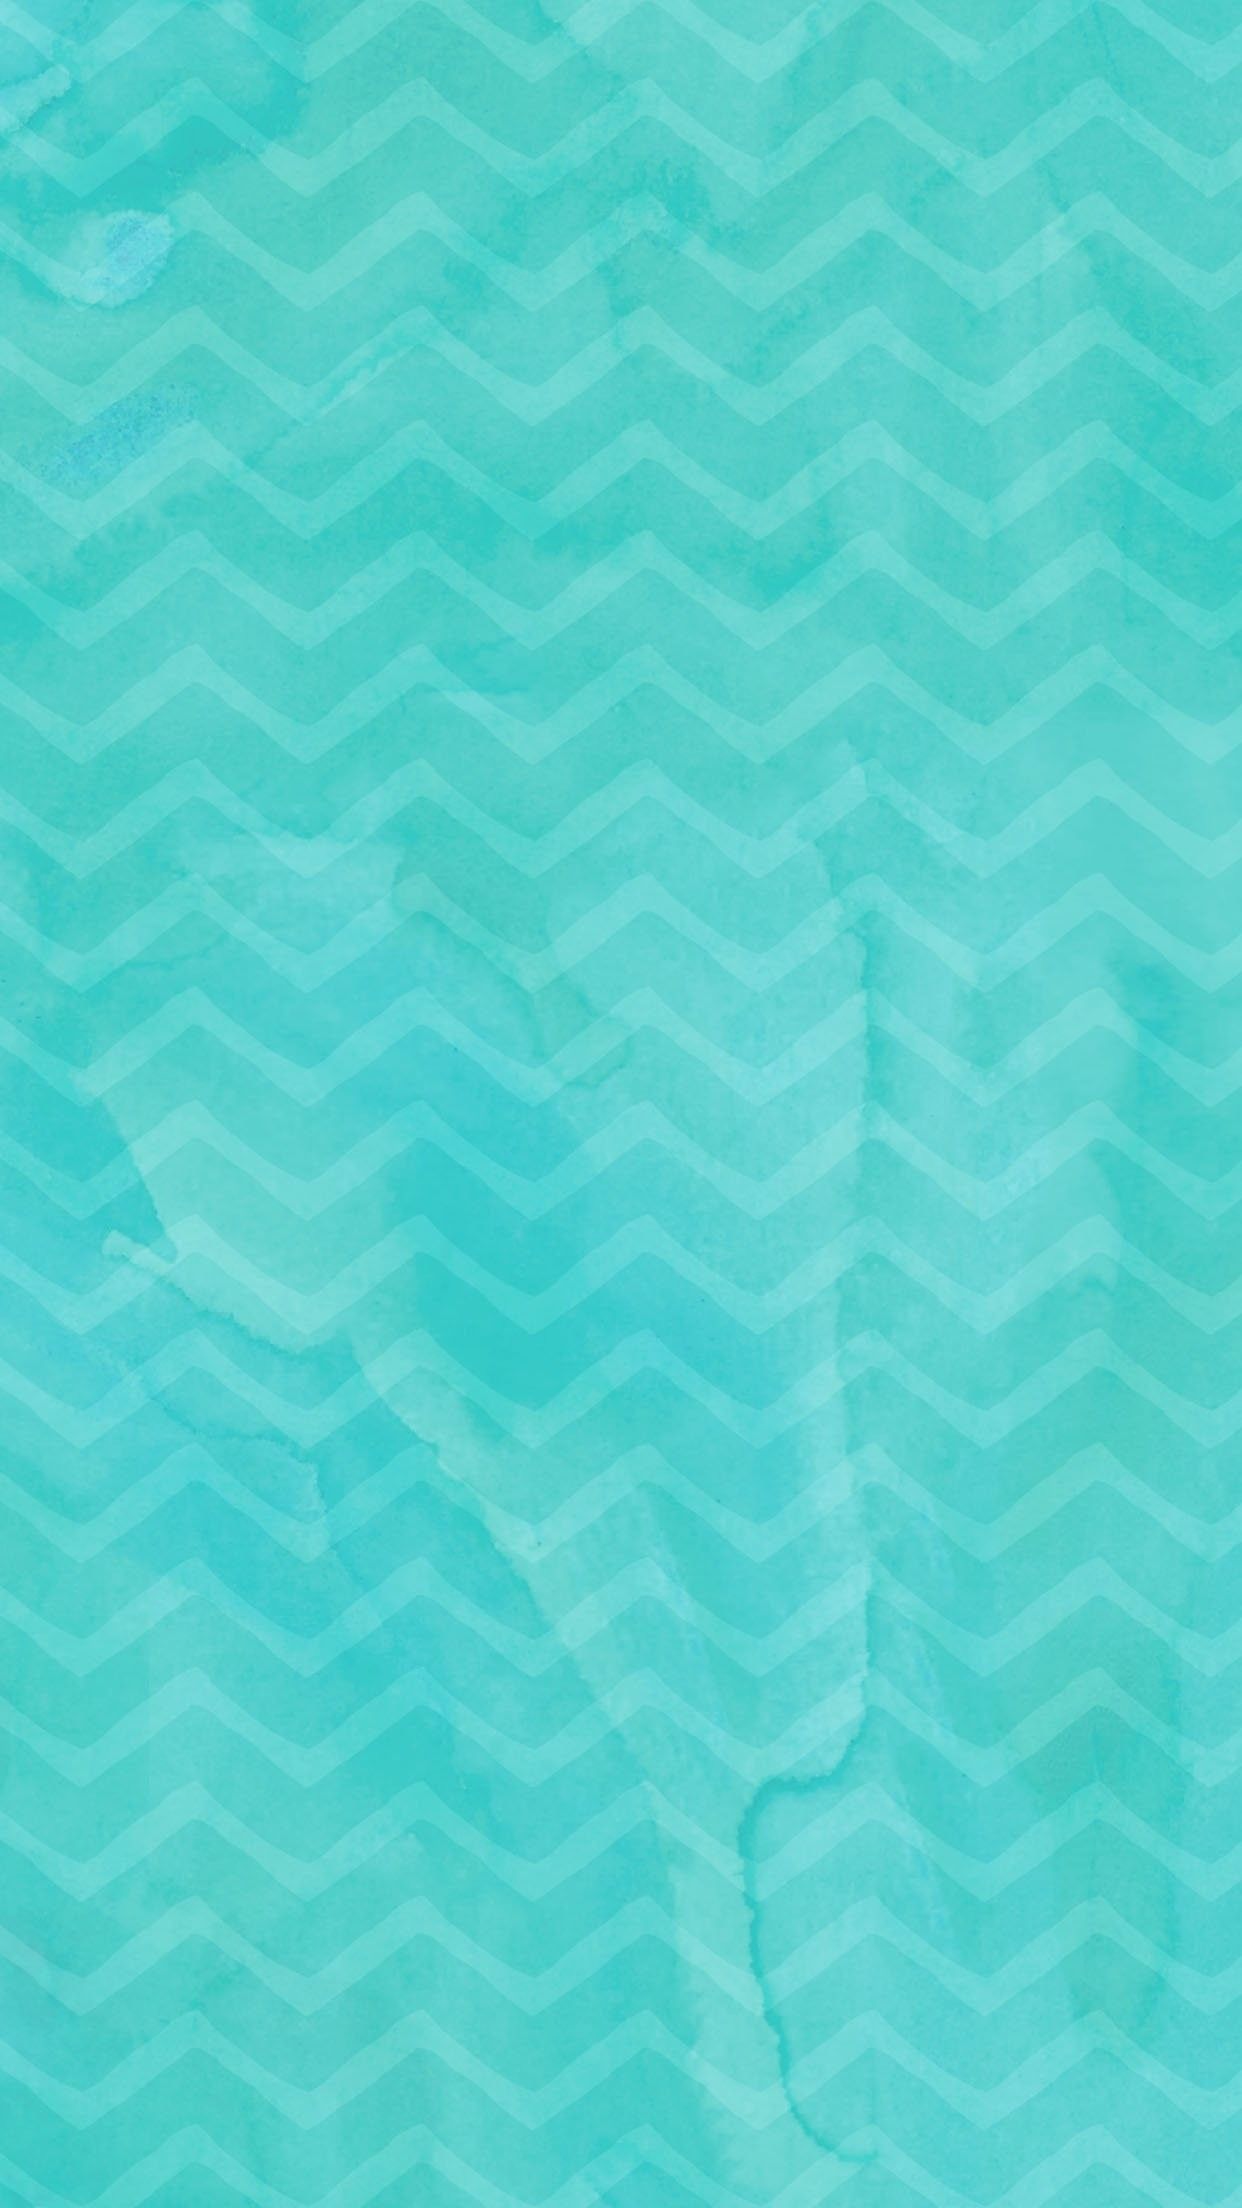 Teal Aesthetic Wallpapers Wallpaper Cave